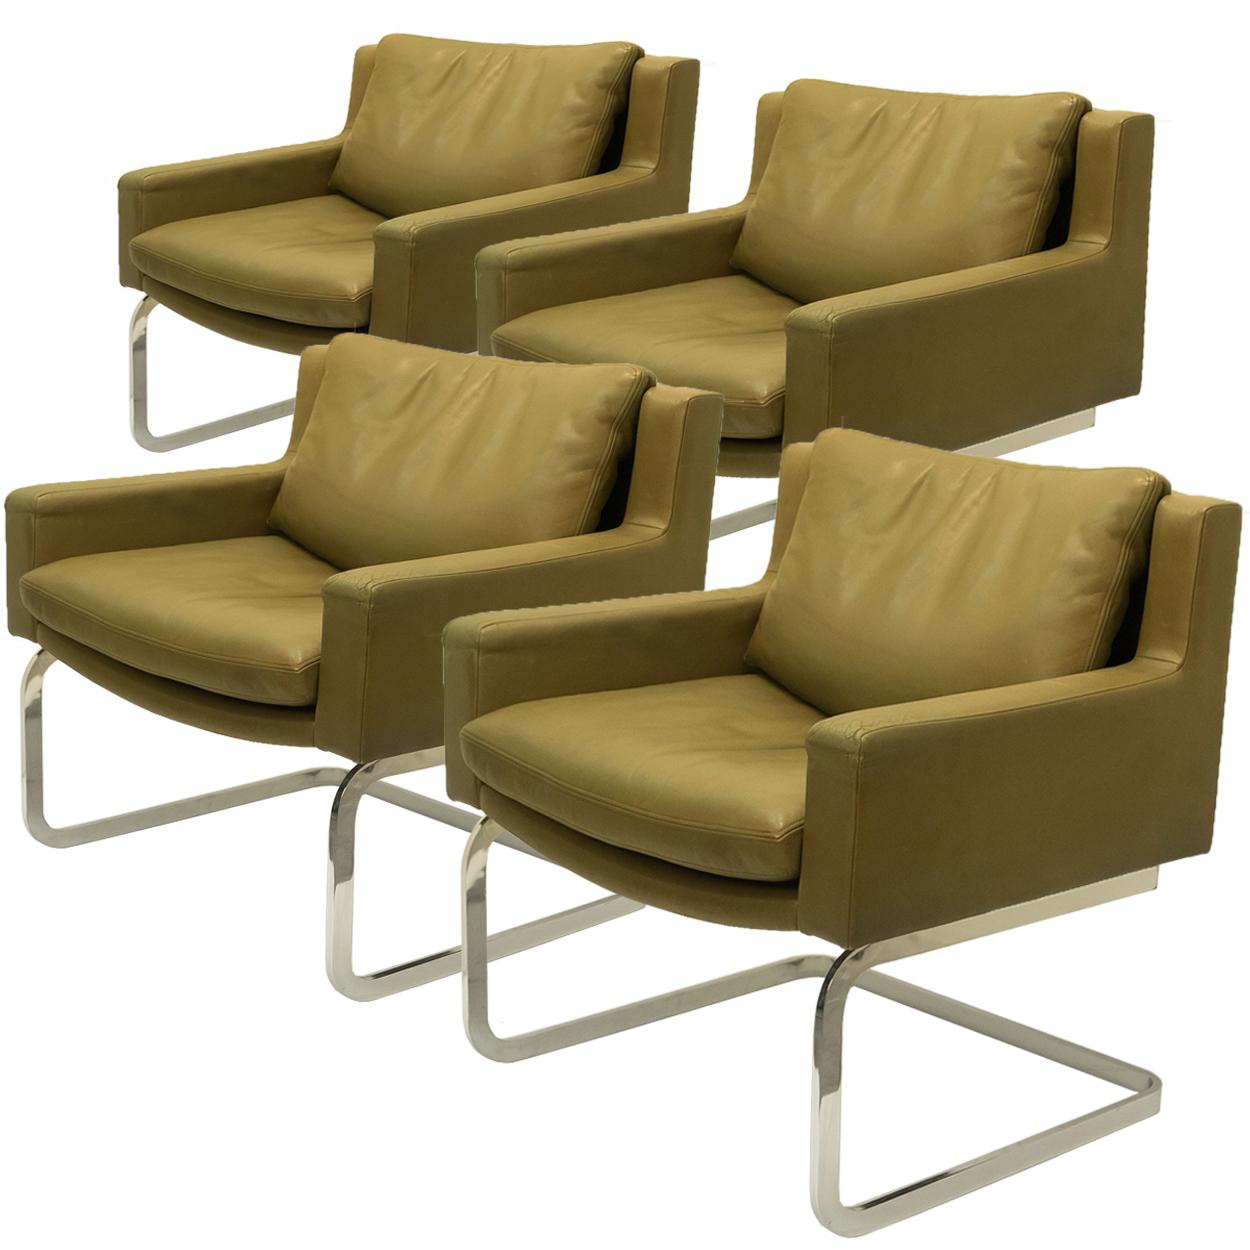 Set of four highly desirable armchairs designed by Robert Haussmann for De Sede of Switzerland, circa 1950s. The collection was later distributed in the US by Stendig Furniture during the 1960s. Each extremely comfortable armchair is brought to you